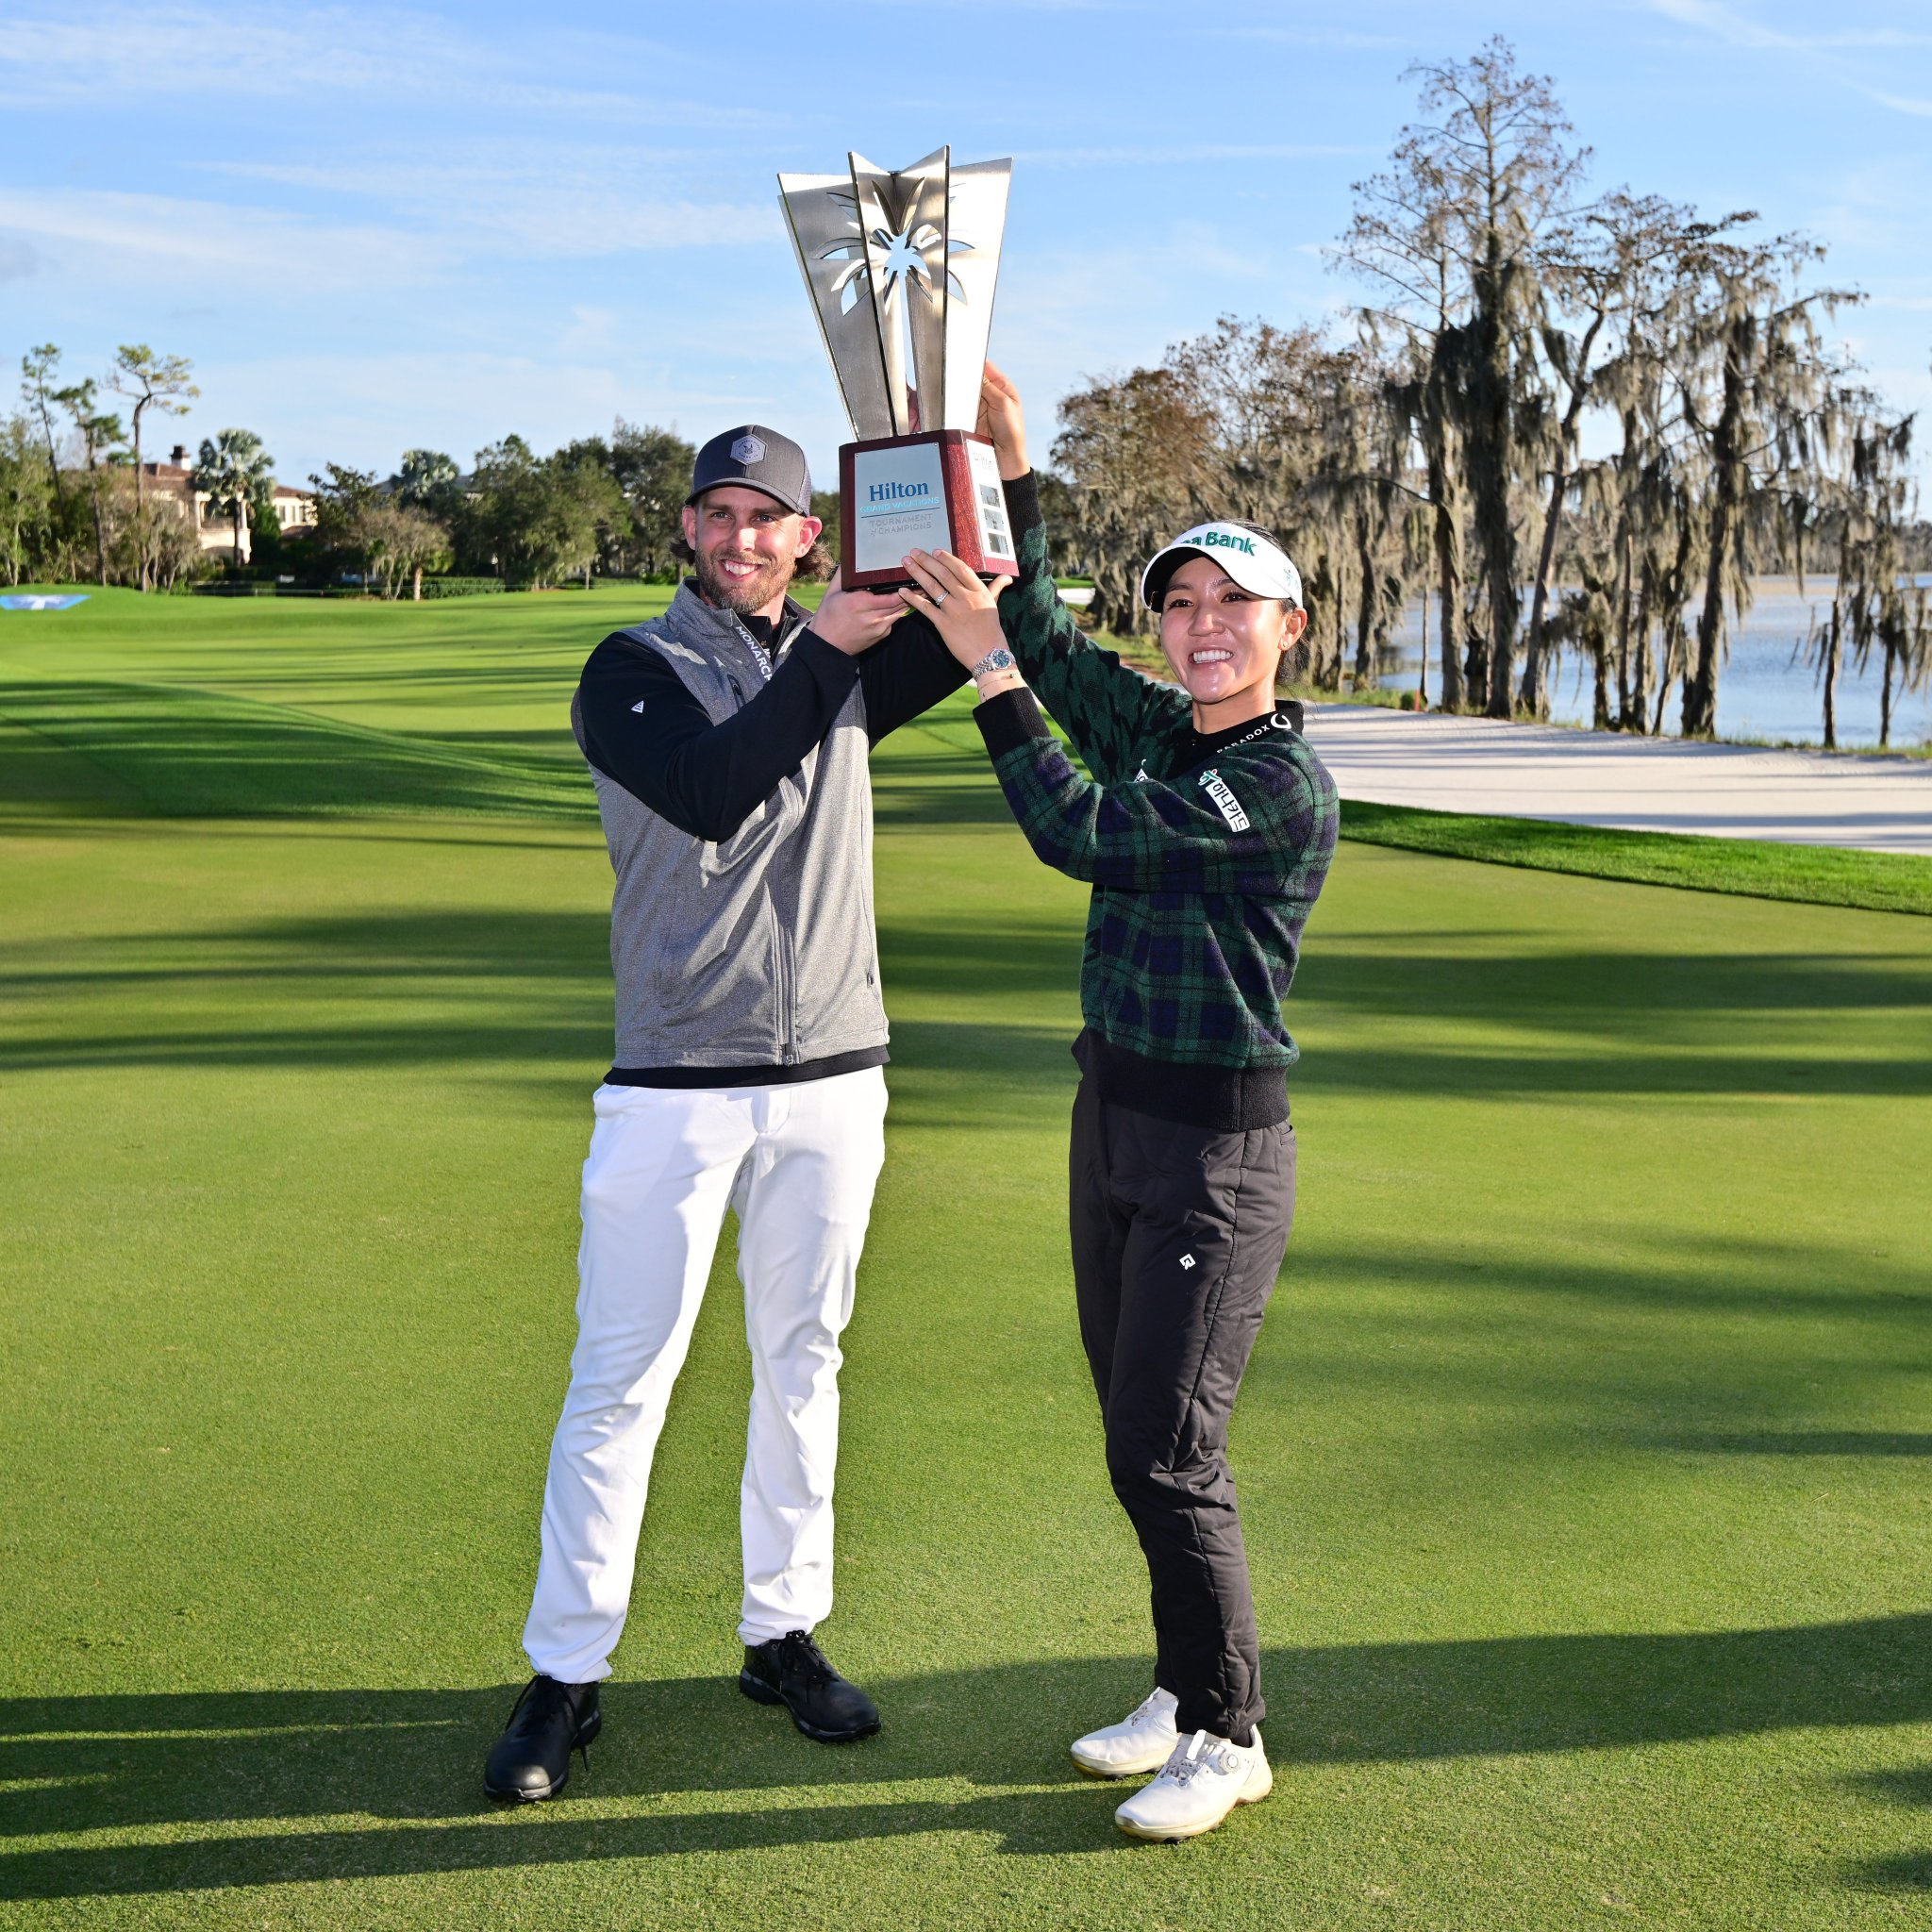 Jeff McNeil and Lydia Ko holding Hilton Grand Vacations TOC trophy made by Malcolm DeMille